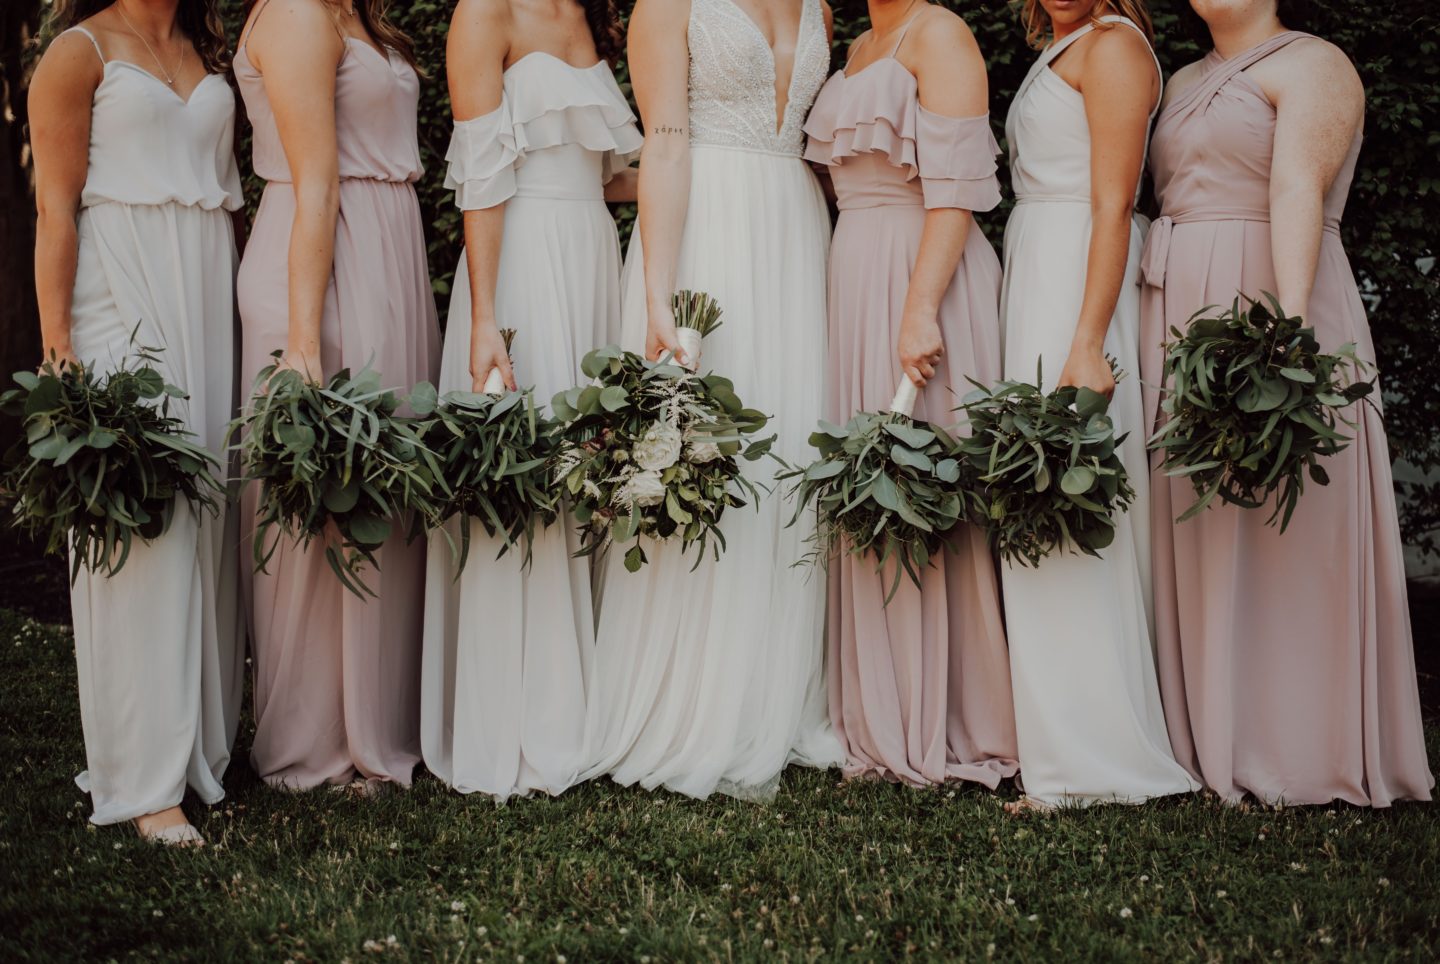 How To Avoid Conflict When It Comes To Bridesmaid Dress Shopping